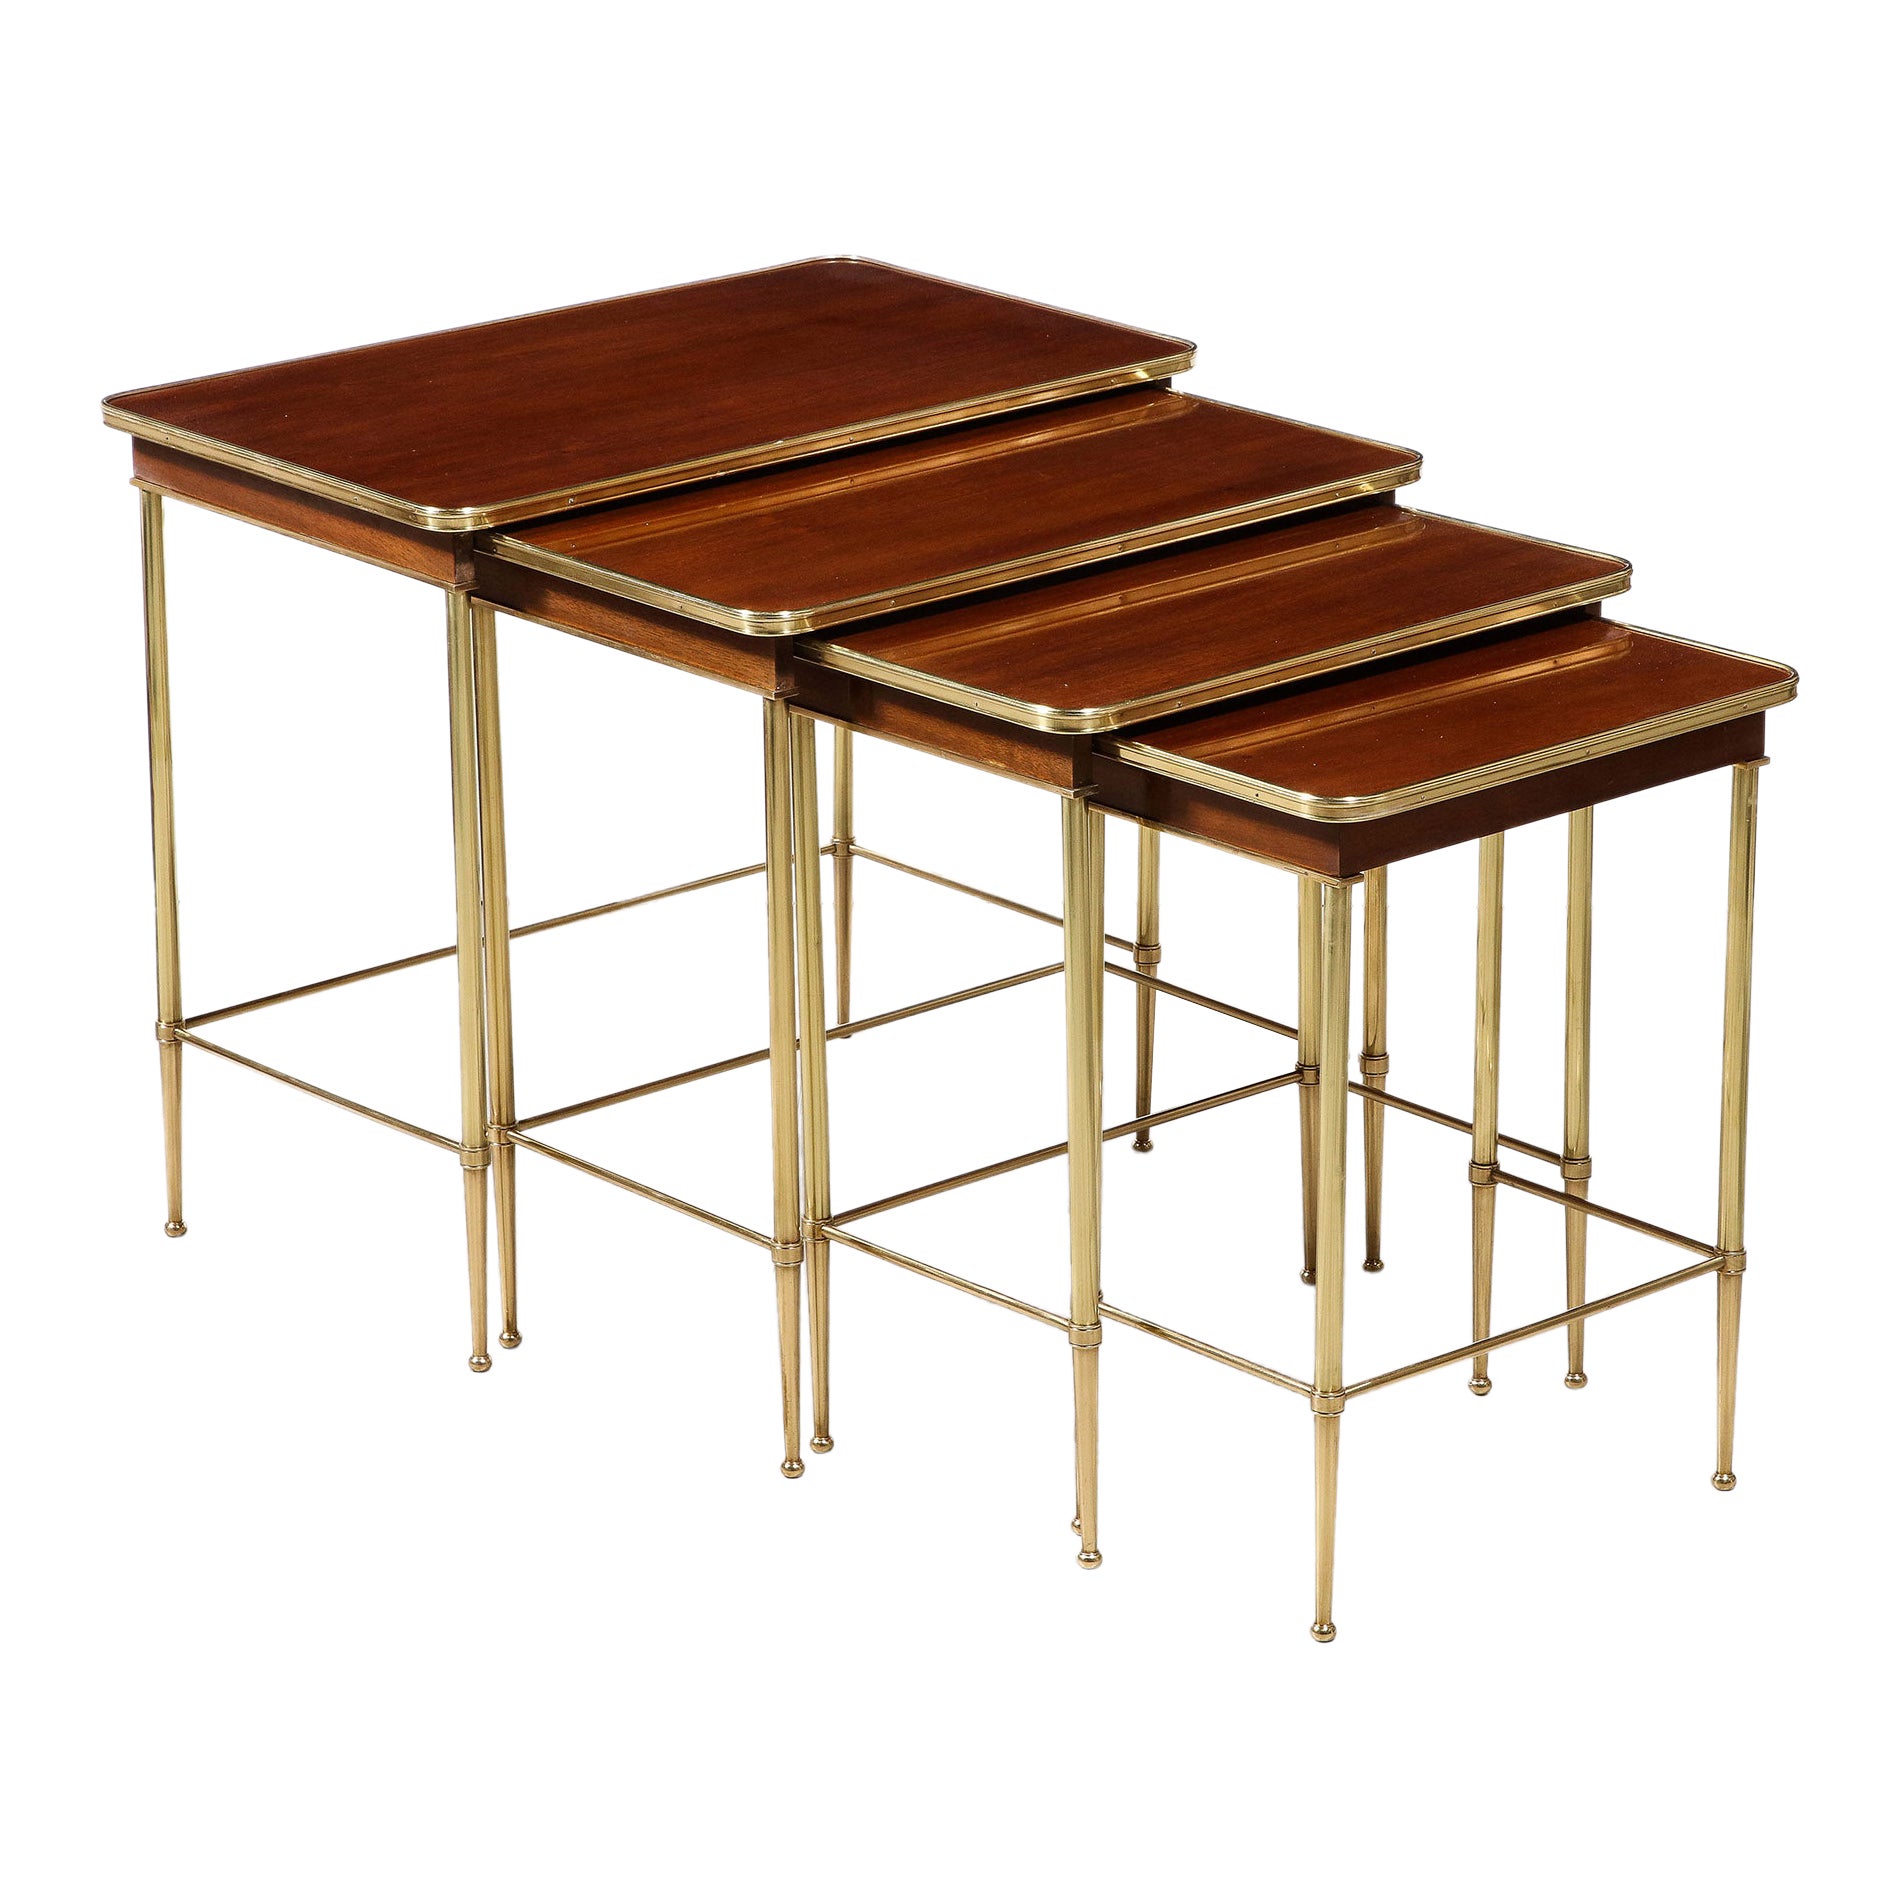 Set of 4 Mahogany and Brass Nesting Tables by Maison Jansen For Sale